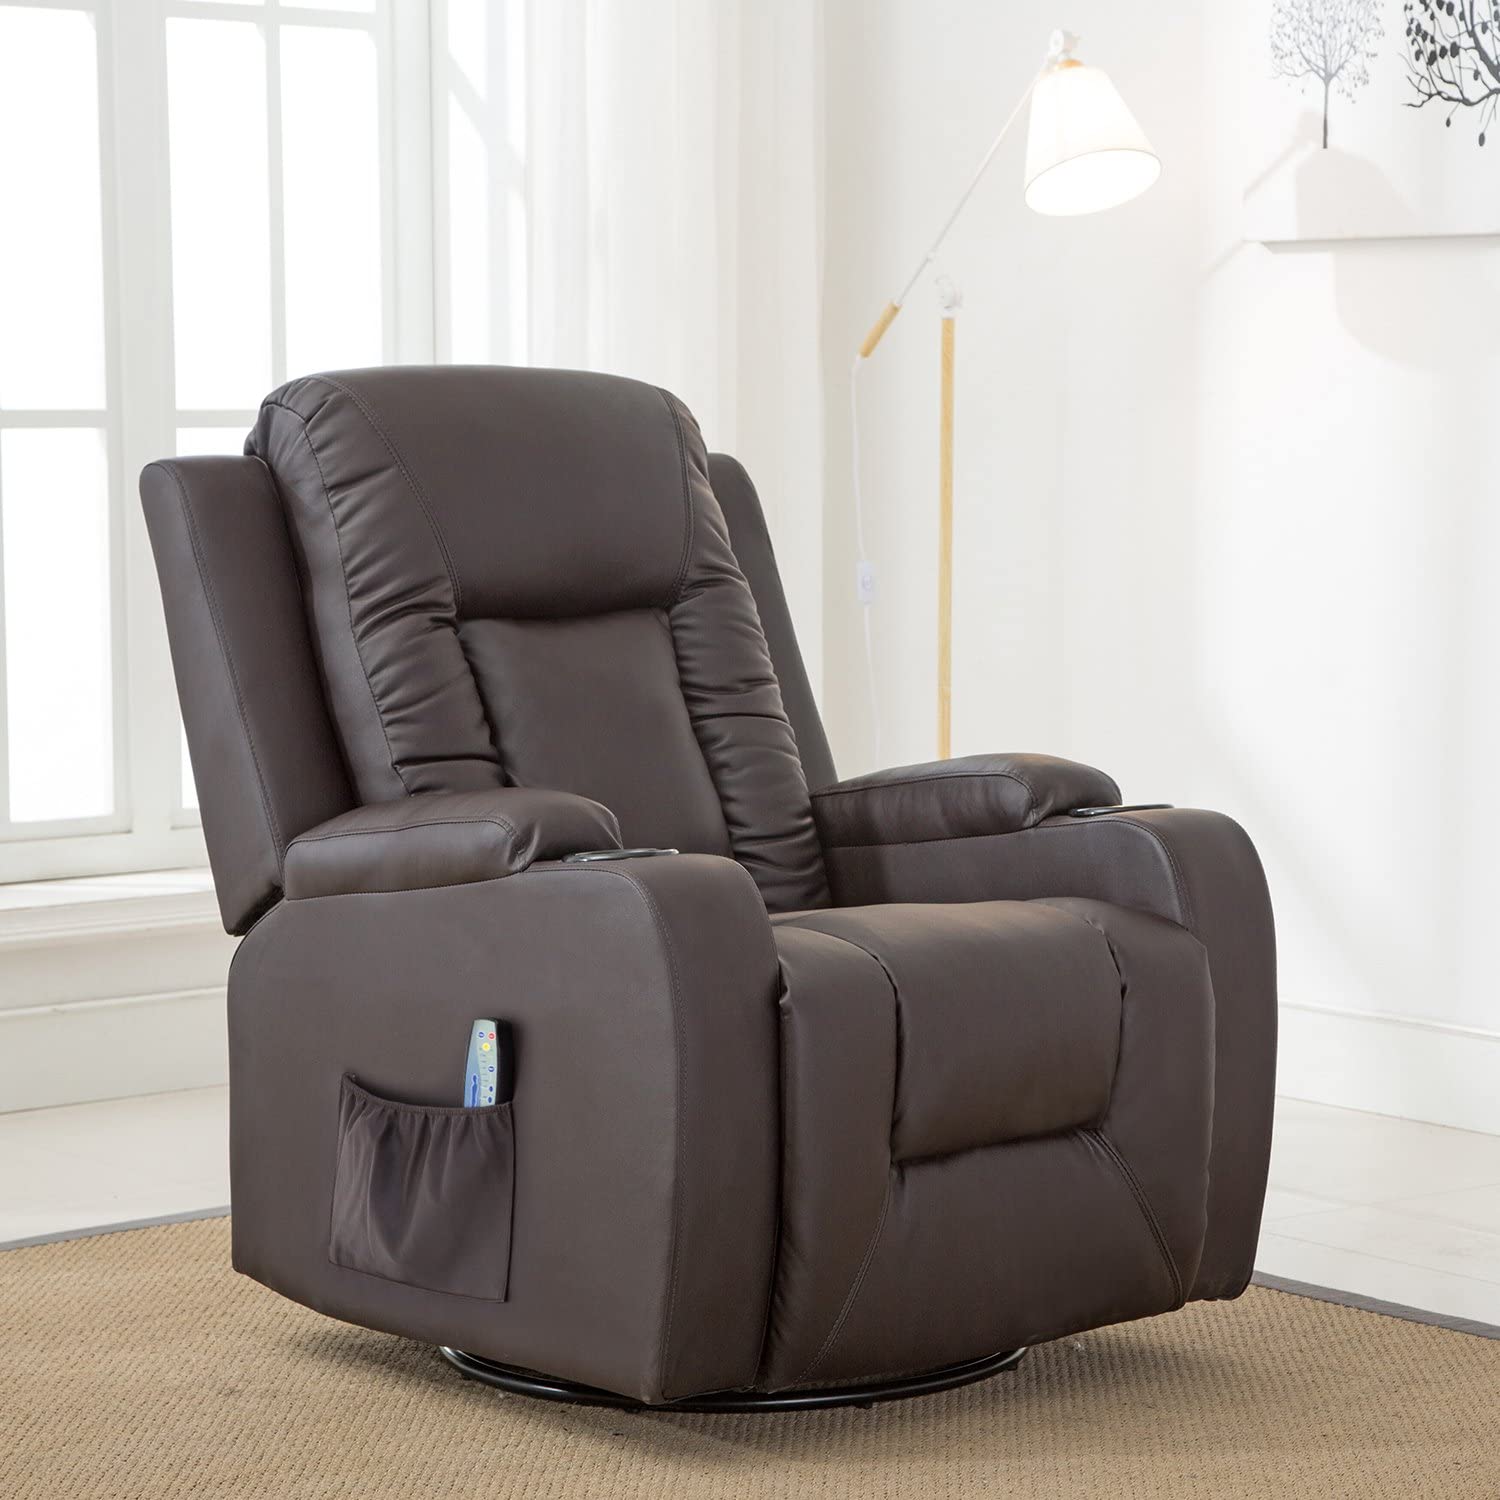 Comhoma Leather Recliner Chair Modern Rocker with Heated Massage